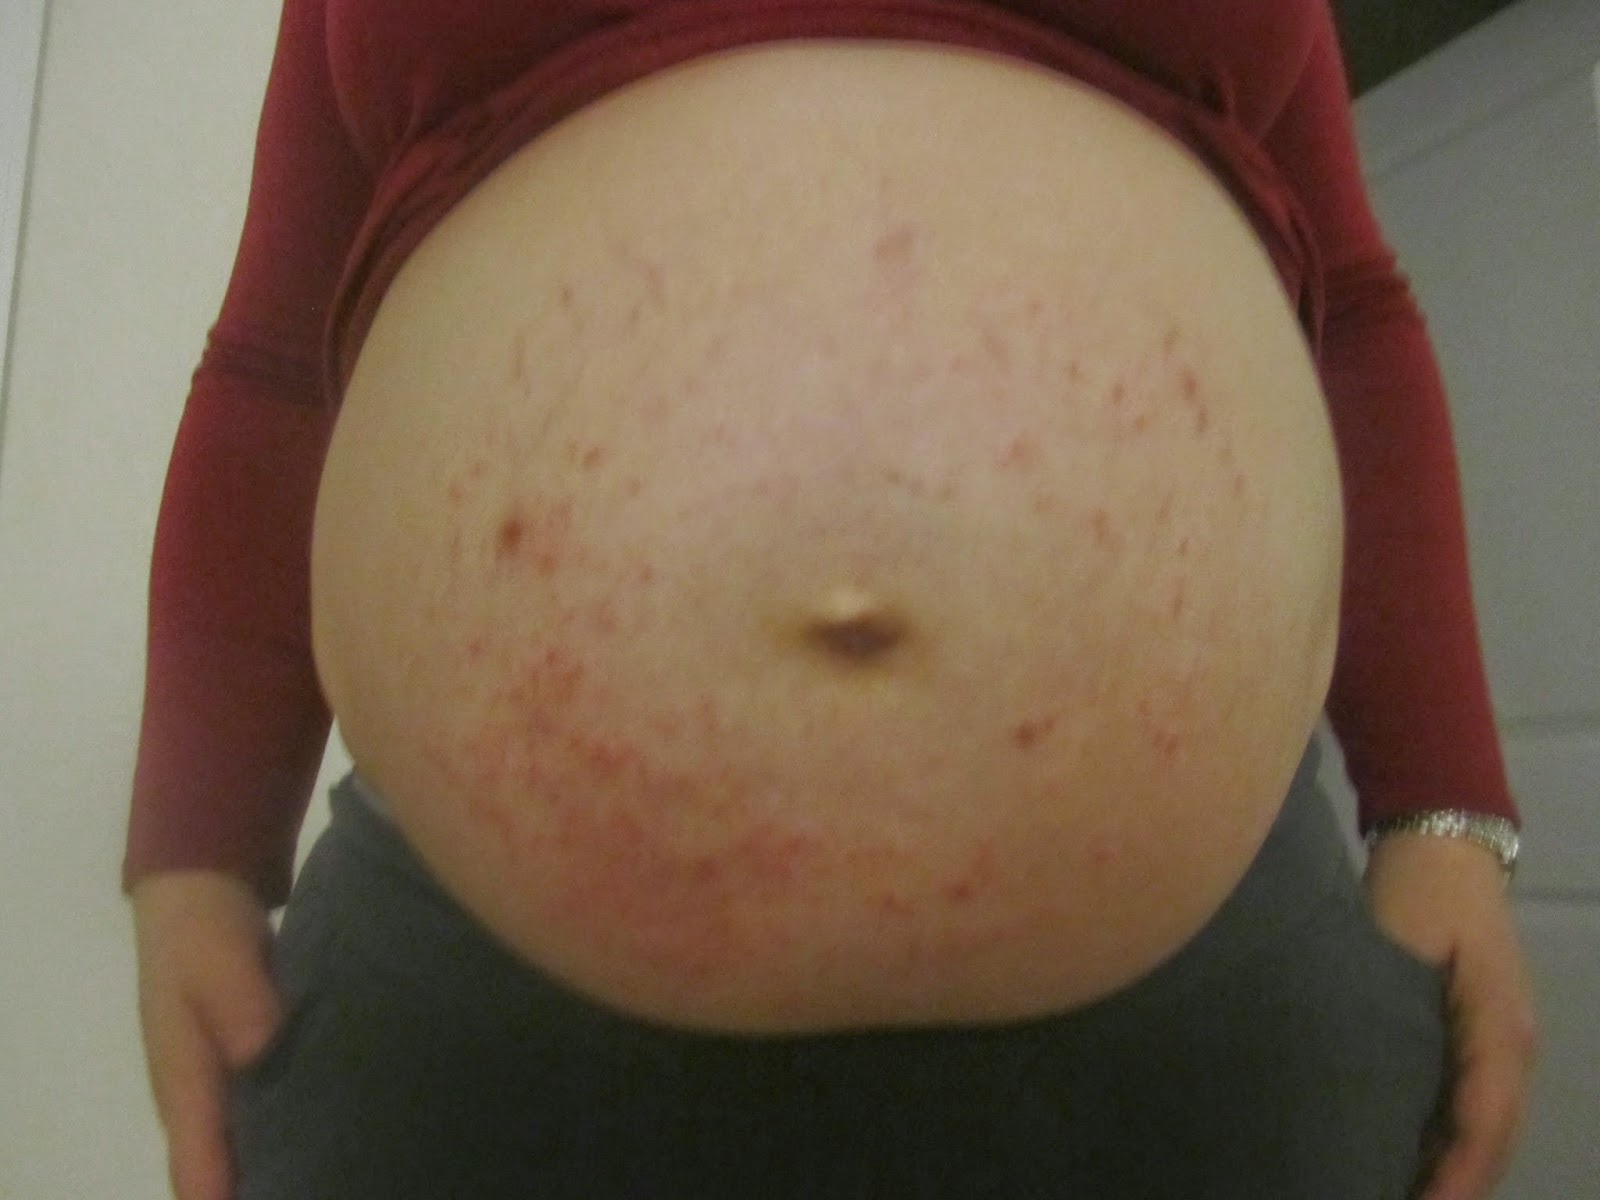 PUPPPs - the pregnancy rash you never wanted